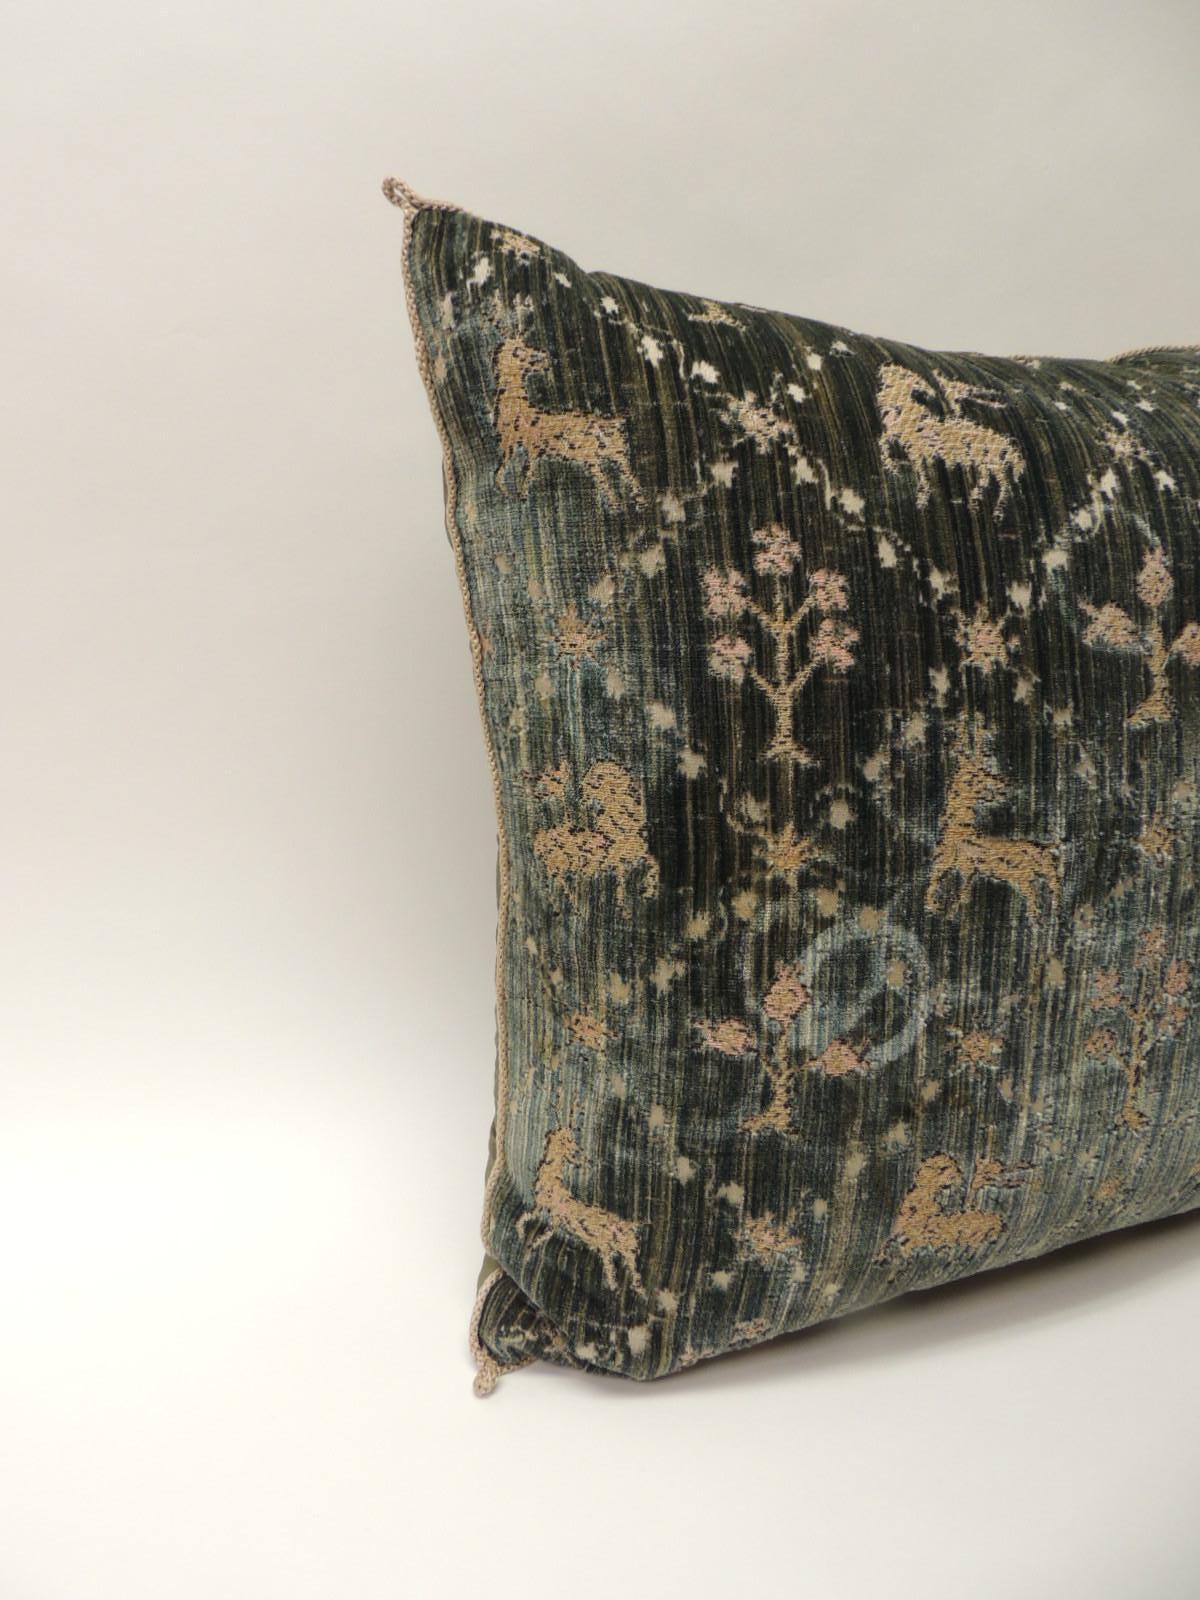 18th century Italian silk green and pink cut velvet decorative pillow. The front document textile depicts a stripe green texture with floral trellis design depicting trees, deers and lions. Embellished with silk cord trim and iridescent silk